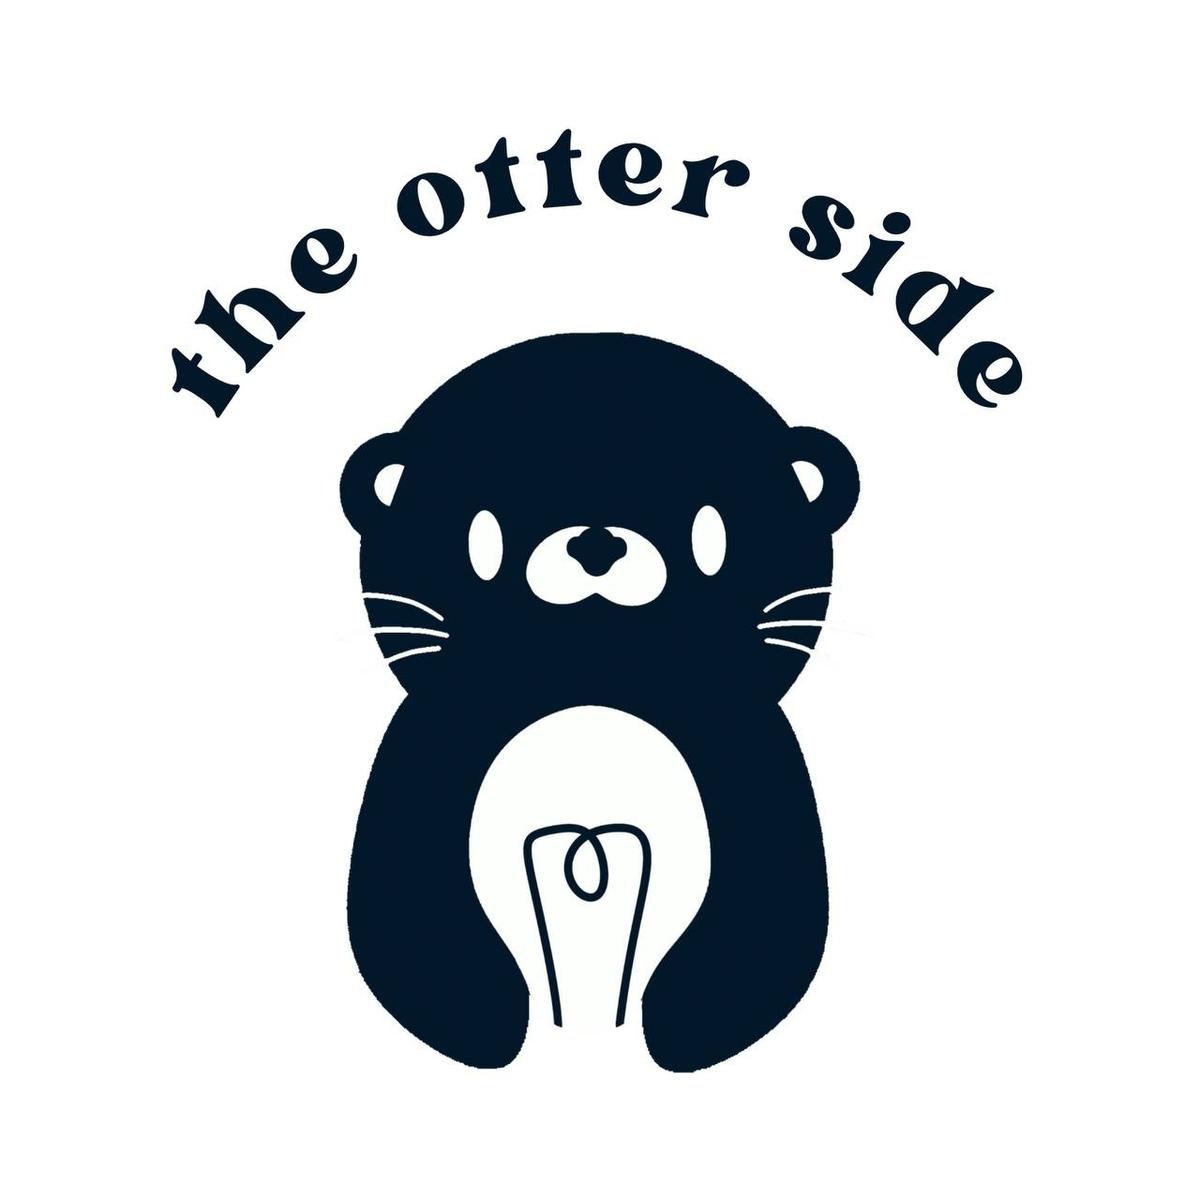 The Otter Side